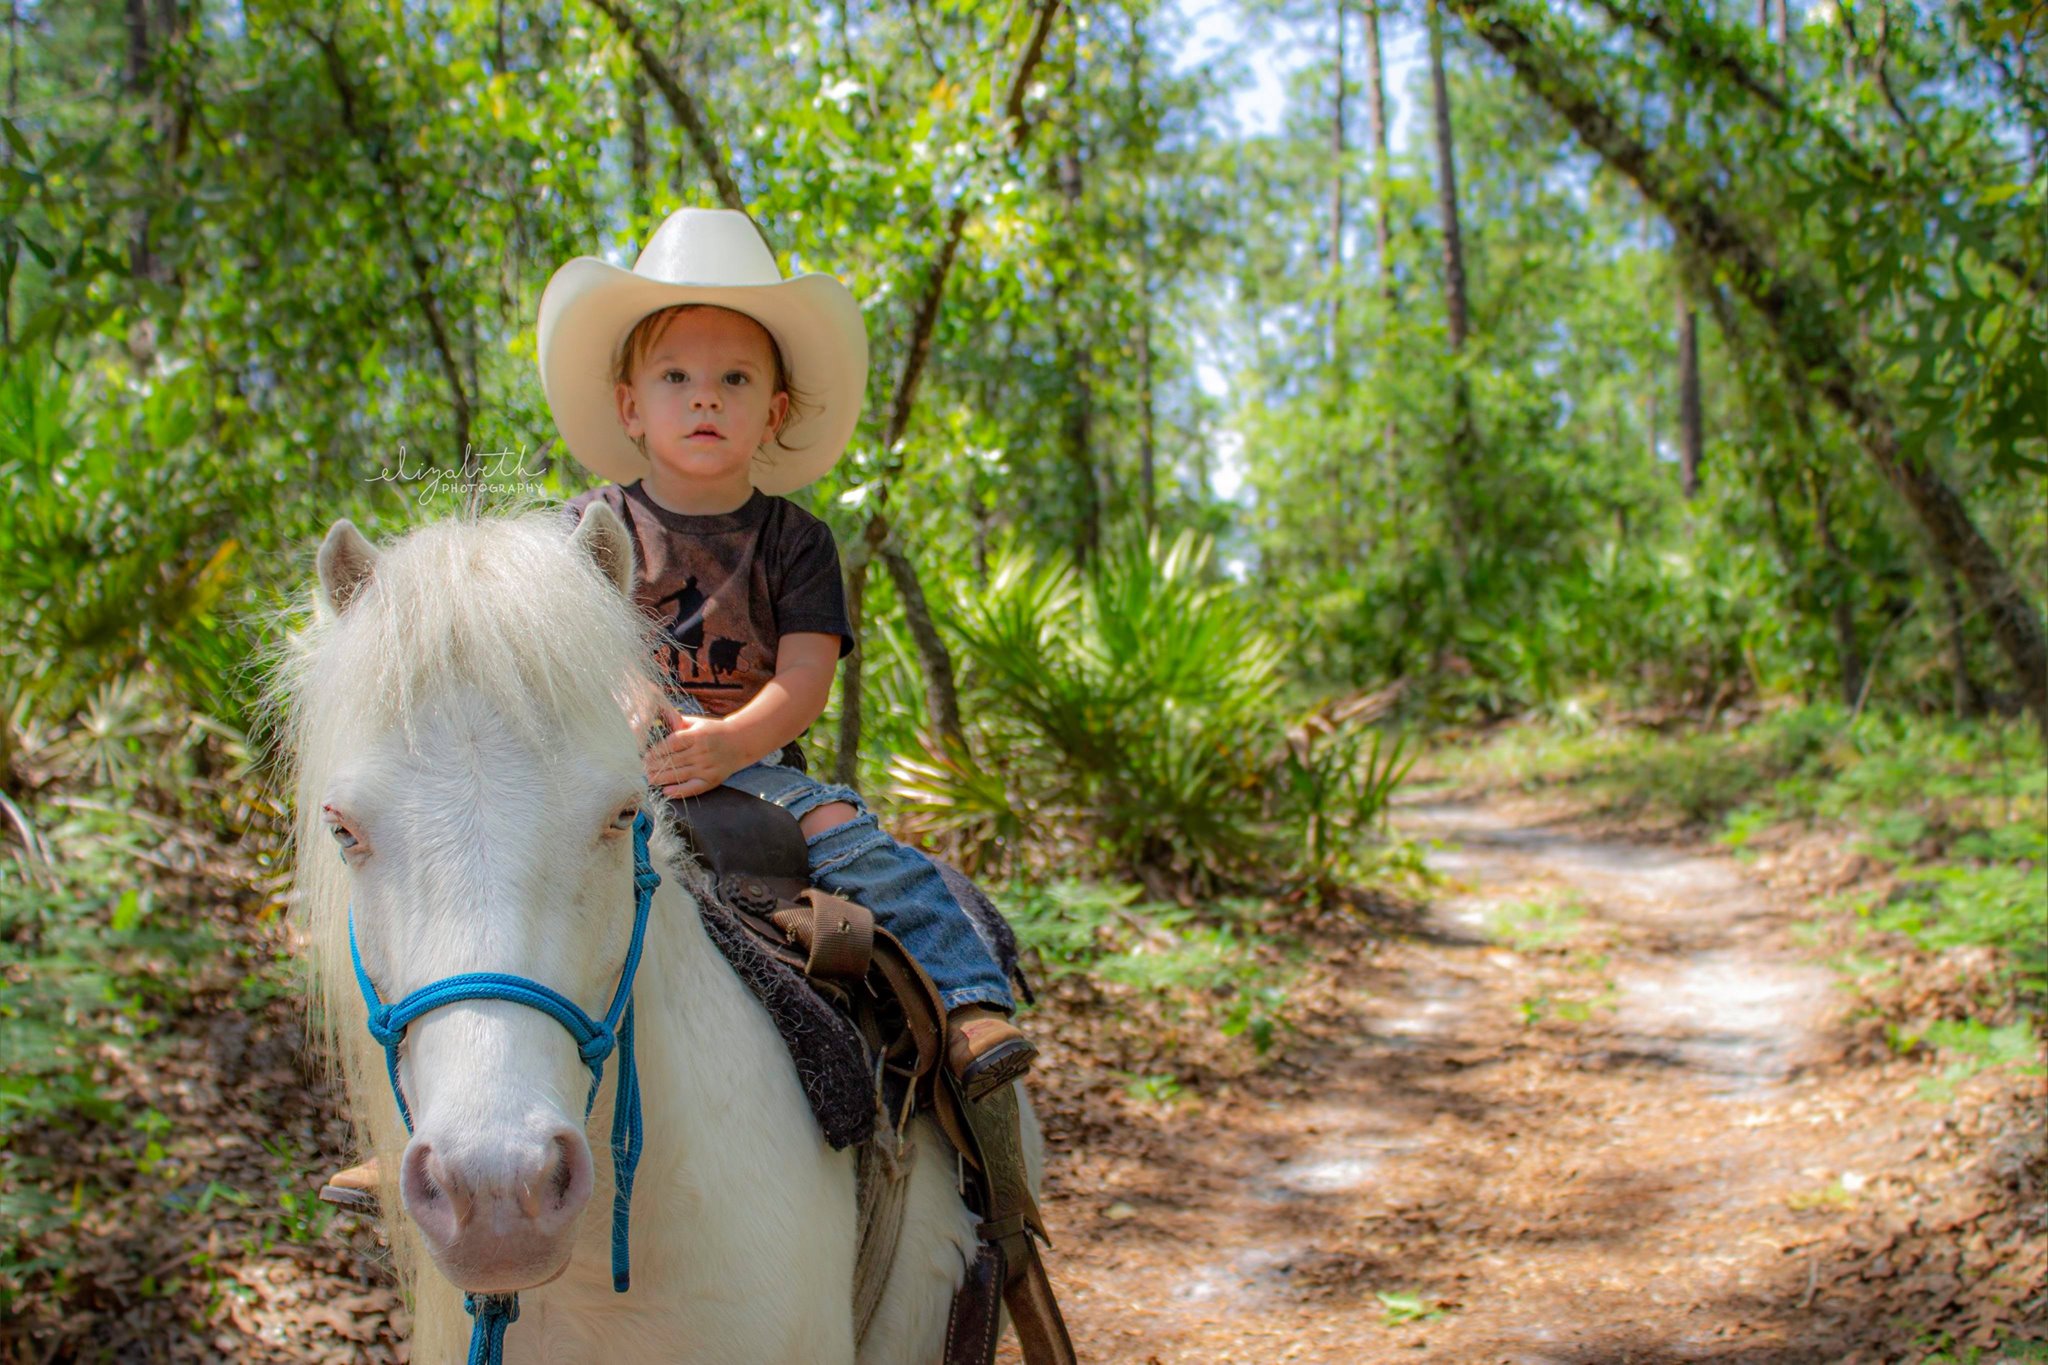 Hero is an adorable miniature horse. He's sweet and likes making kids happy for photoshoots in Jacksonville, FL.